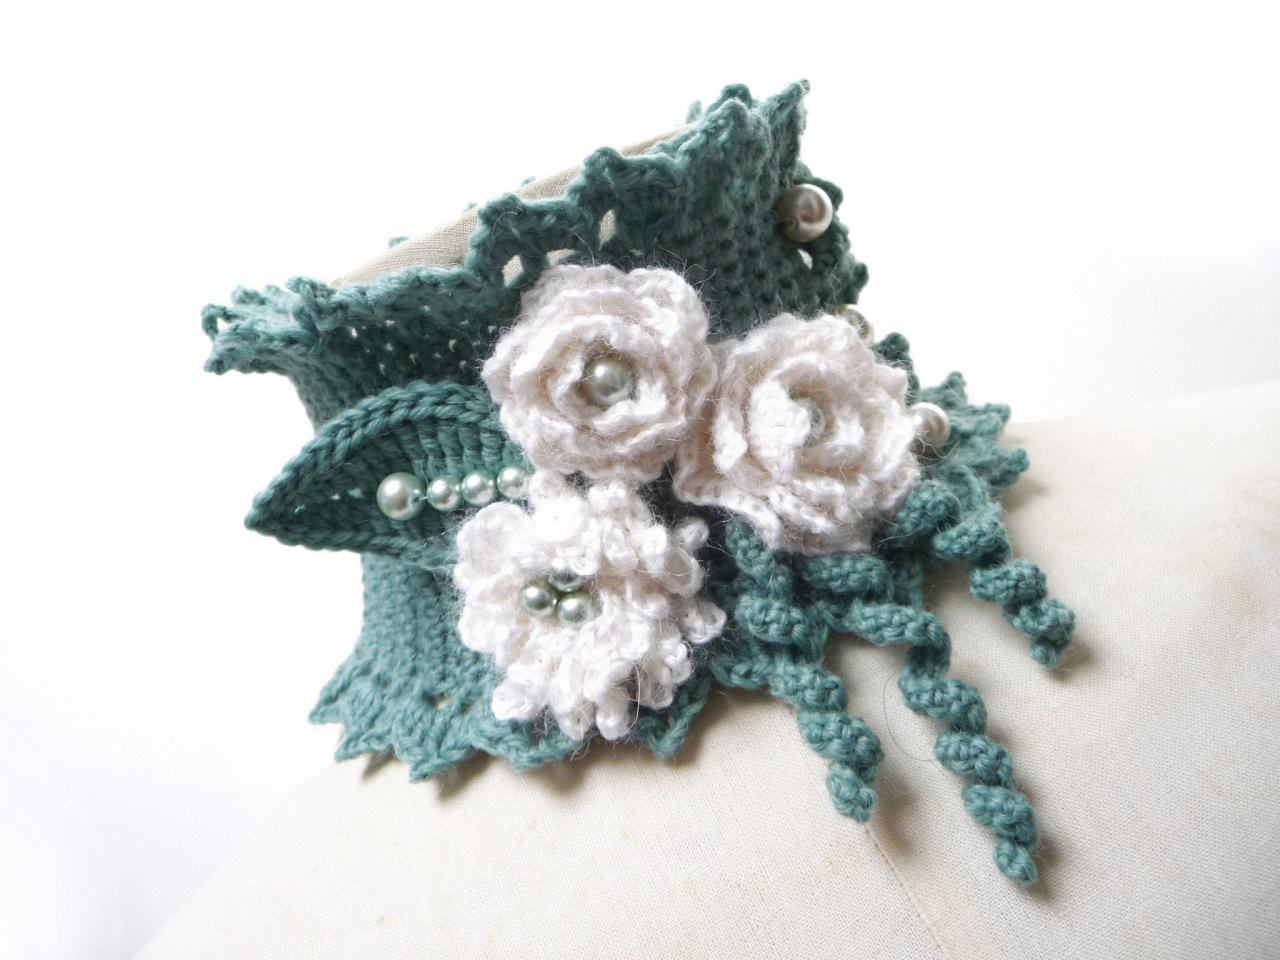 Crocheted Sage Green Neckwarmer With White Alpaca Flowers And Glass Pearls - Lux Cowl Choker - Winter Garden